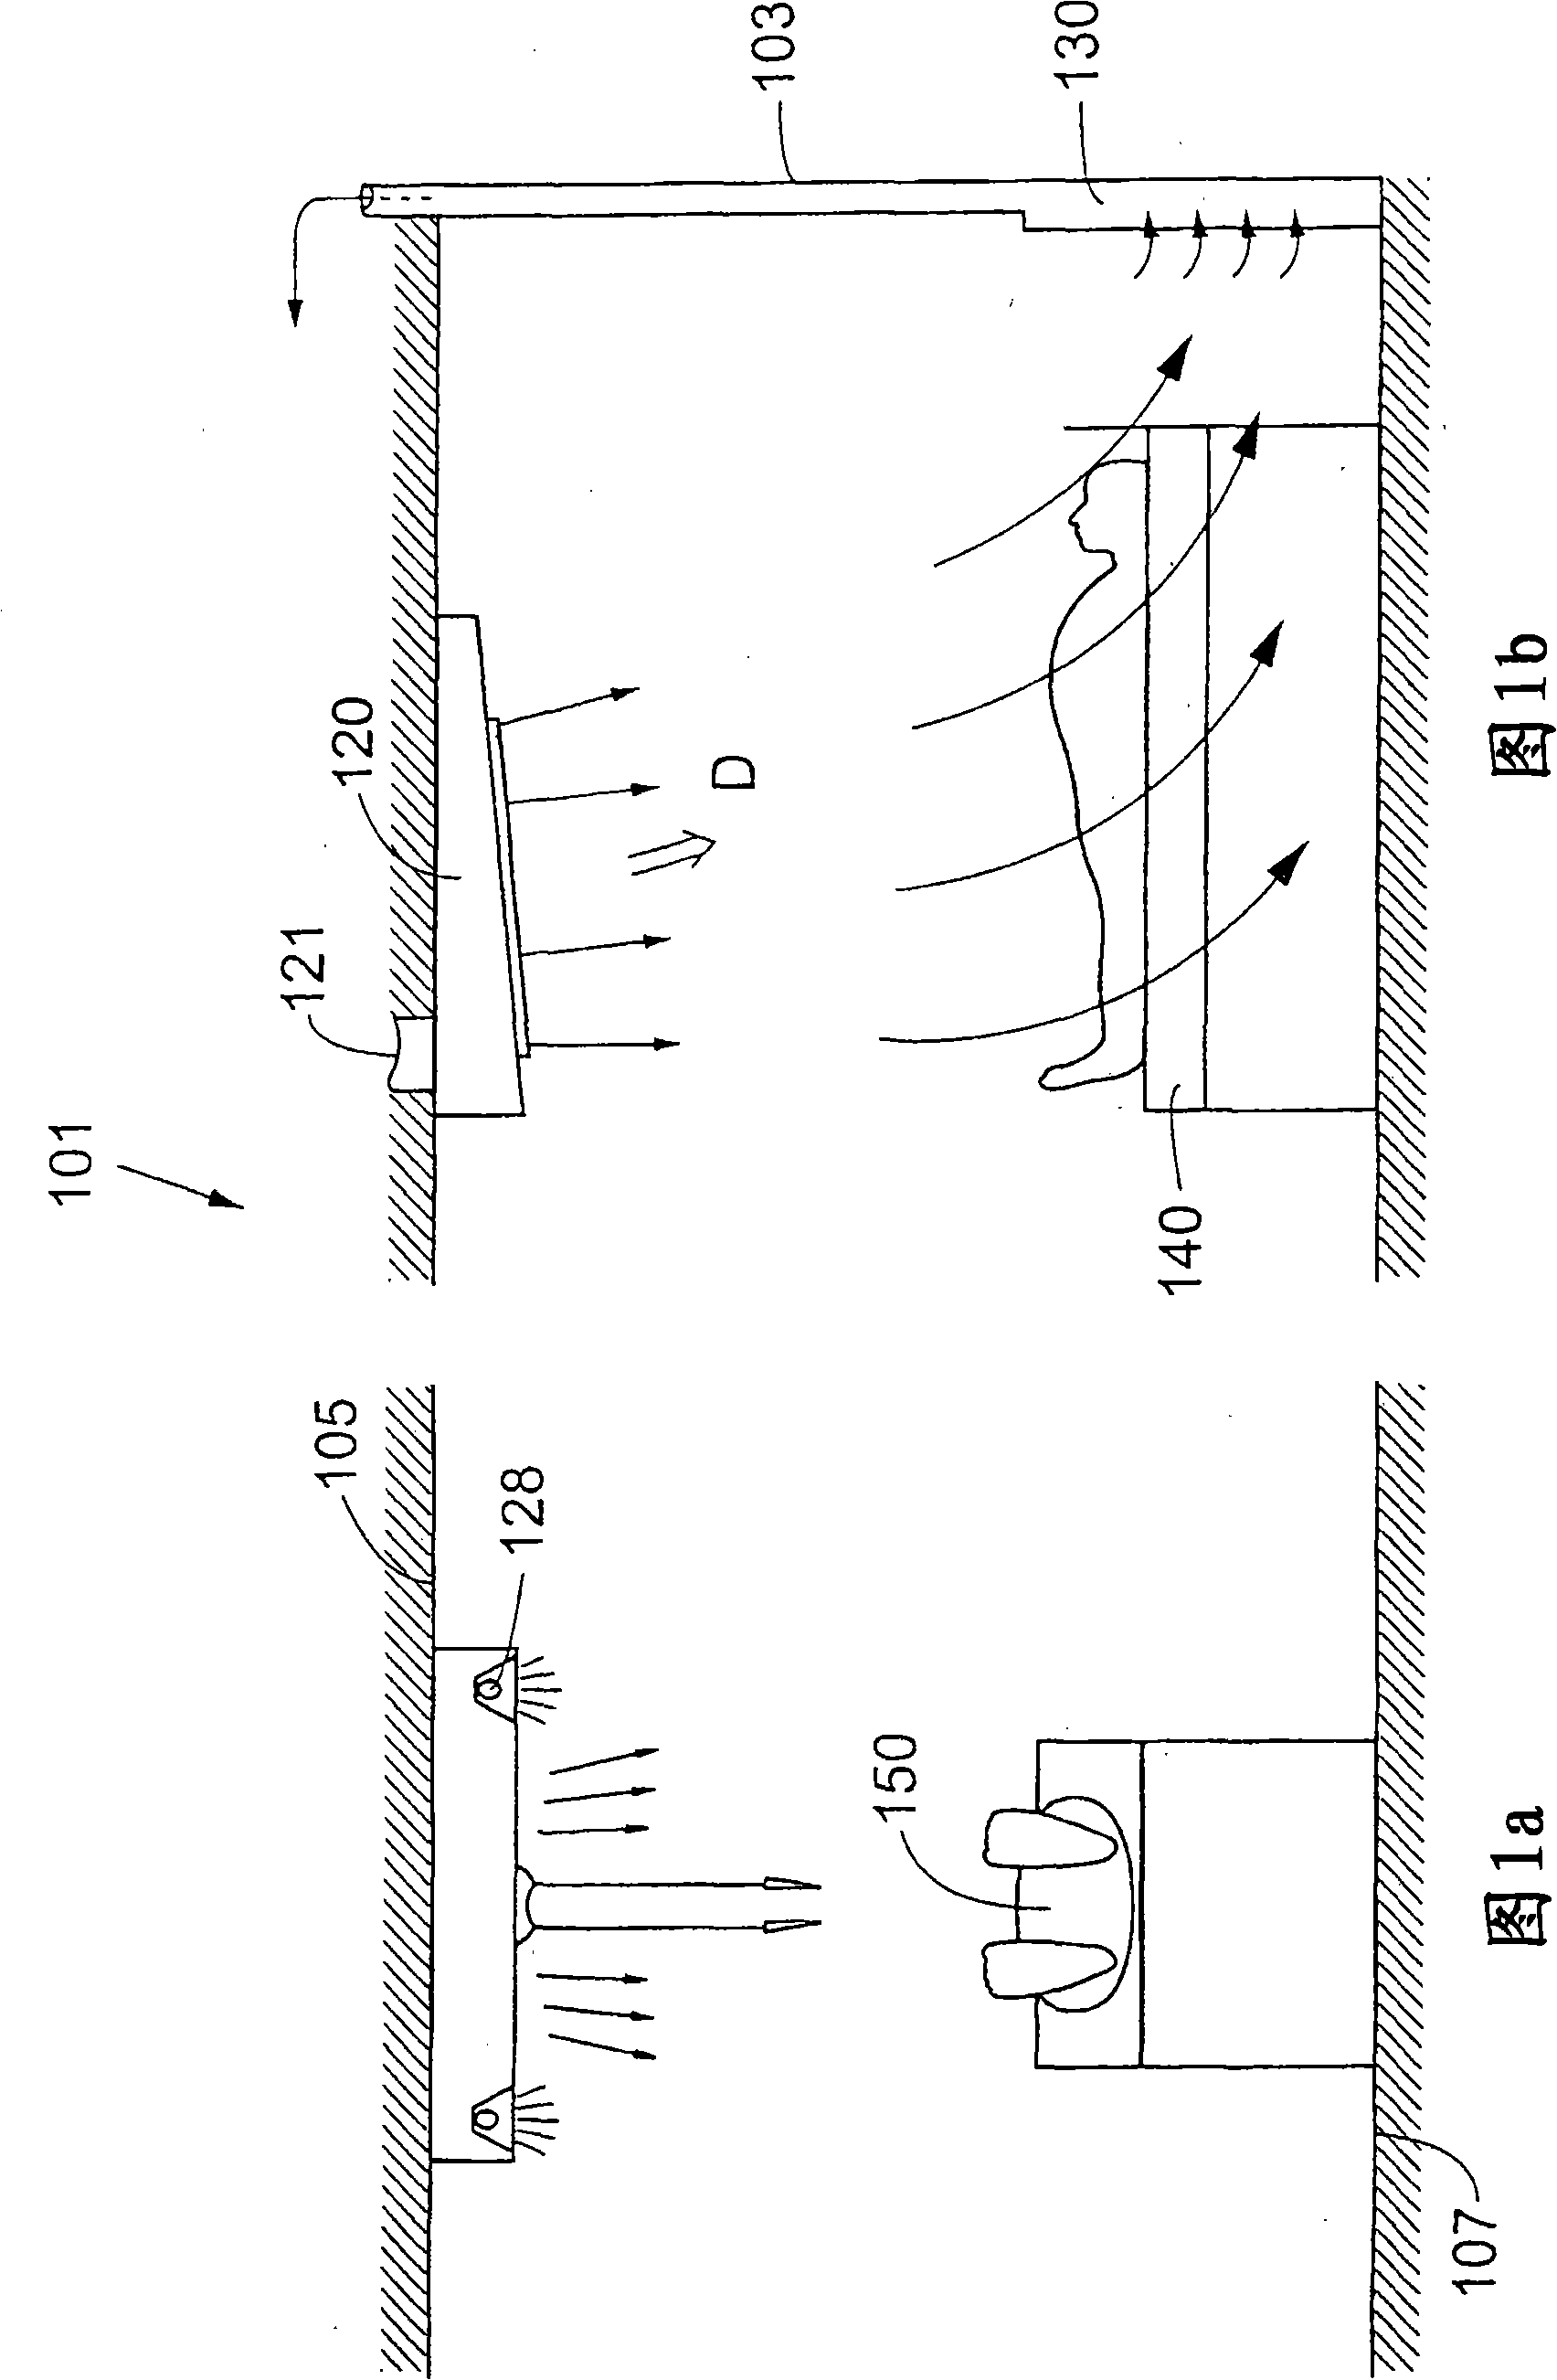 System, device and method for ventilation